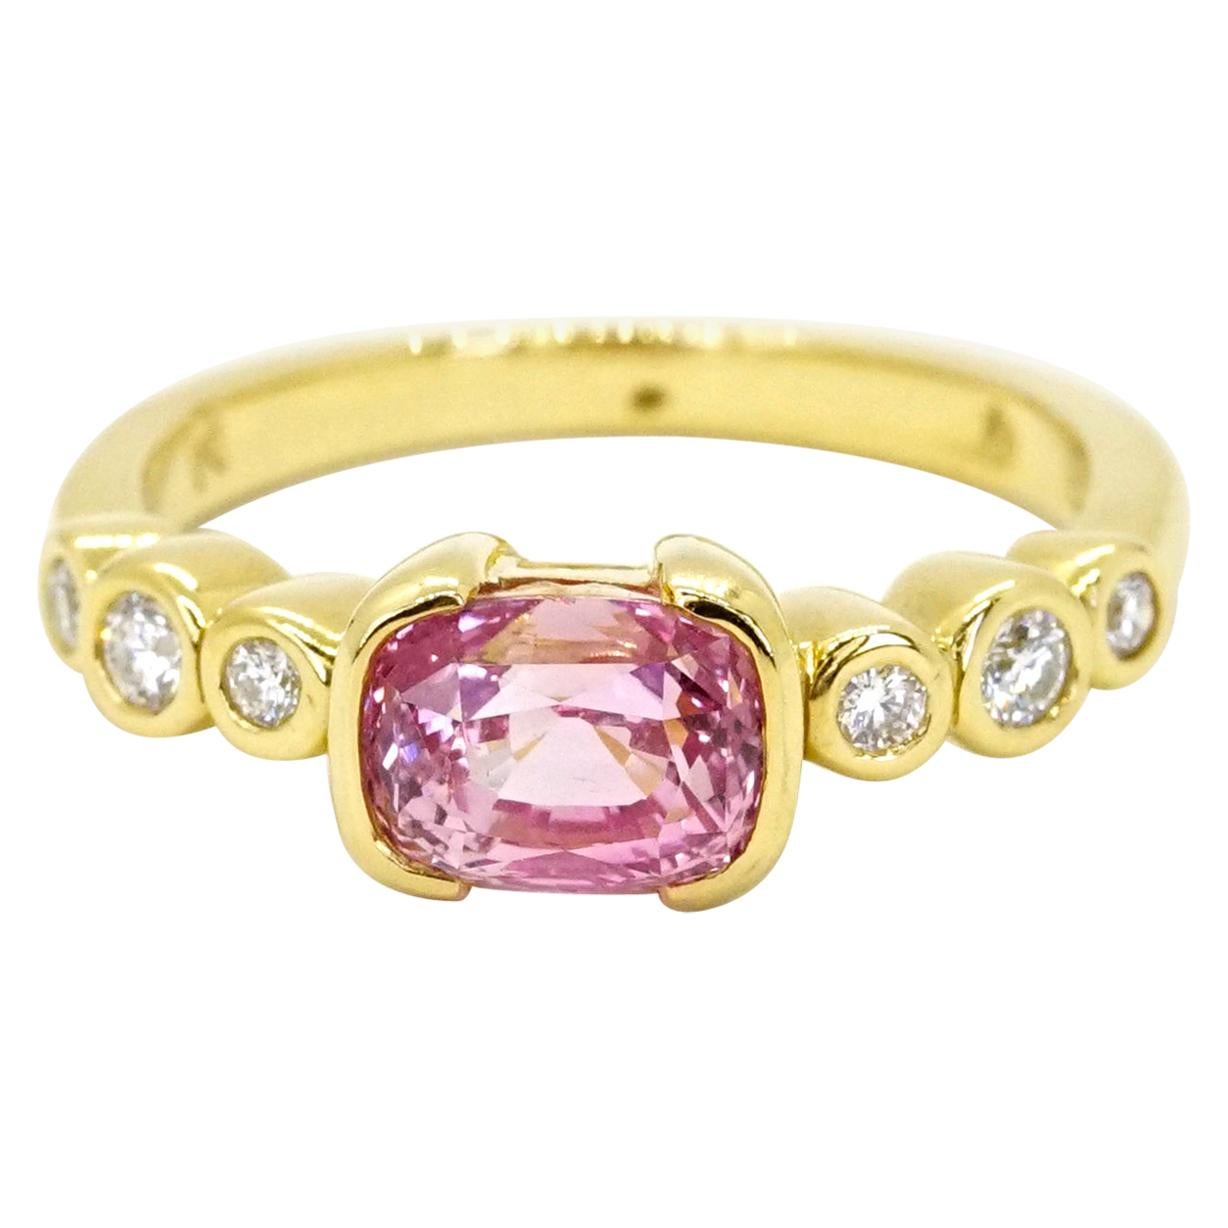 Gubelin Certified 2.11 Carats Orangy-Pink Padparadscha Sapphire Ring For Sale